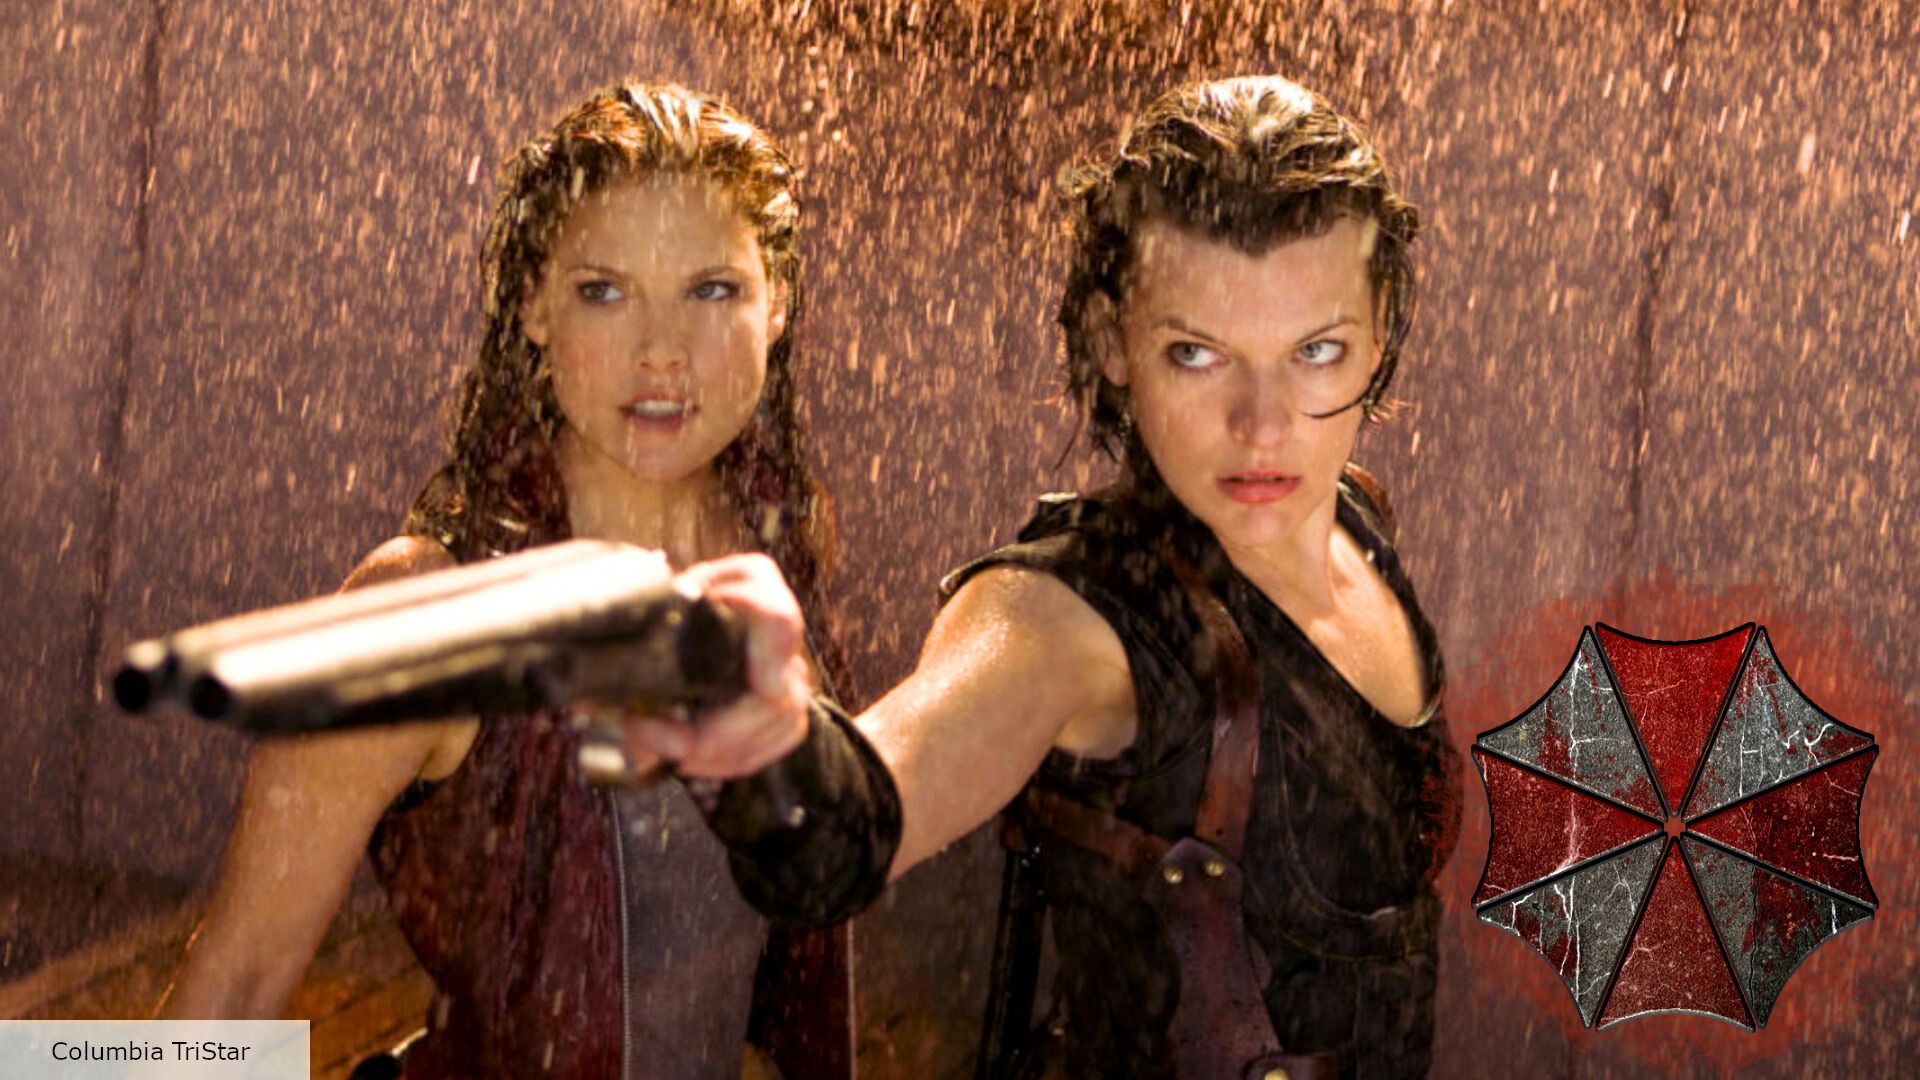 How to watch all 'Resident Evil' movies and shows in chronological